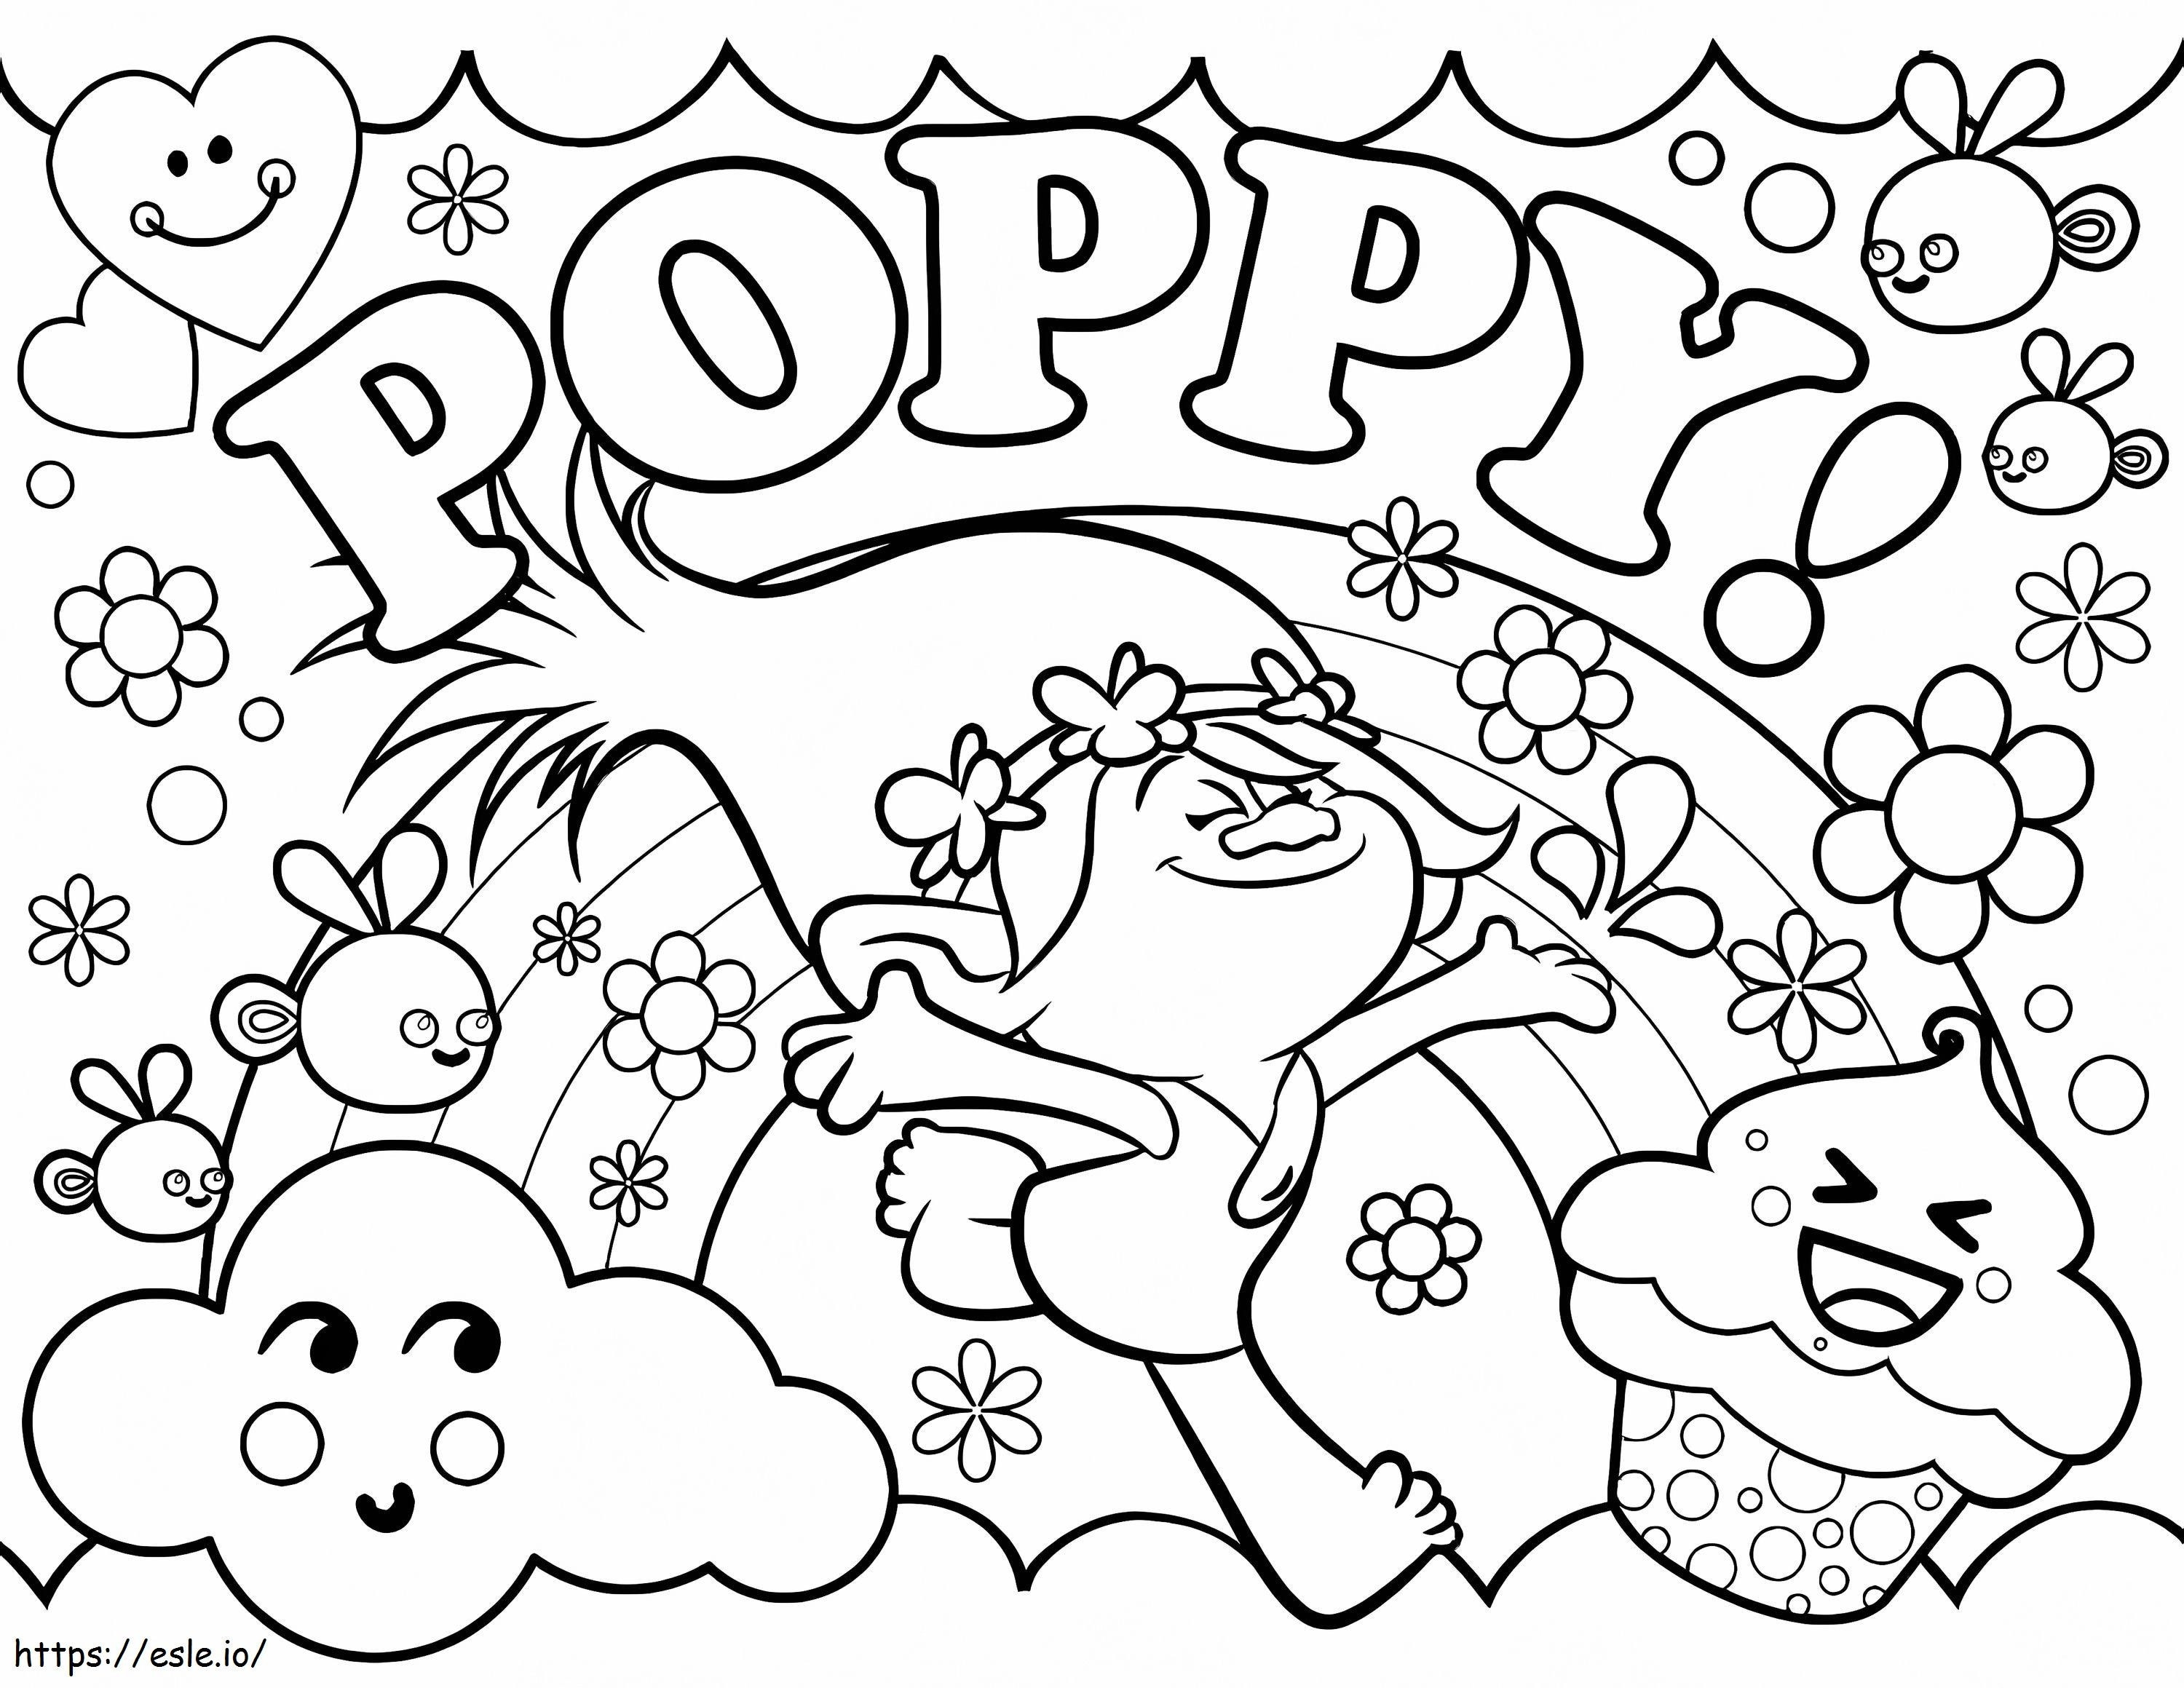 Trolls Poppy coloring page